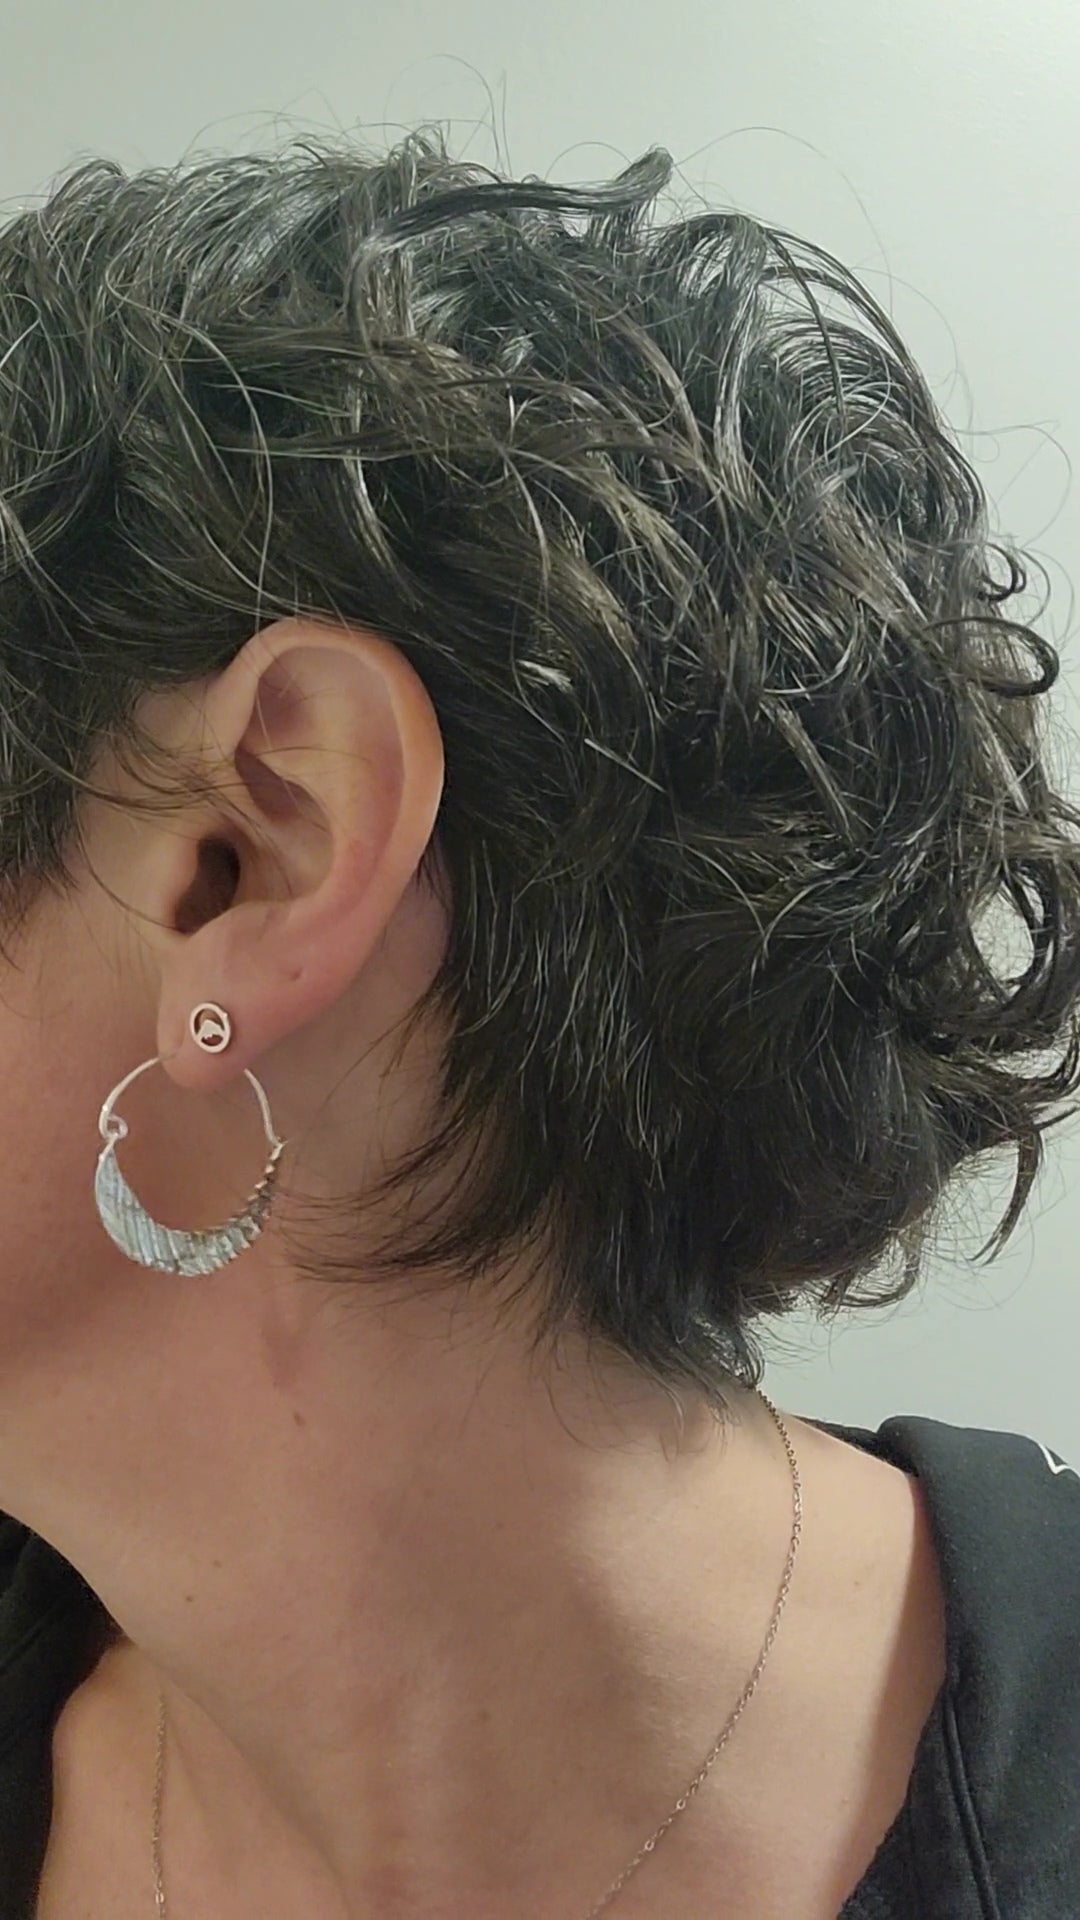 sterling silver Beaumont mountain stud earring shown with cockle shell hoop earring